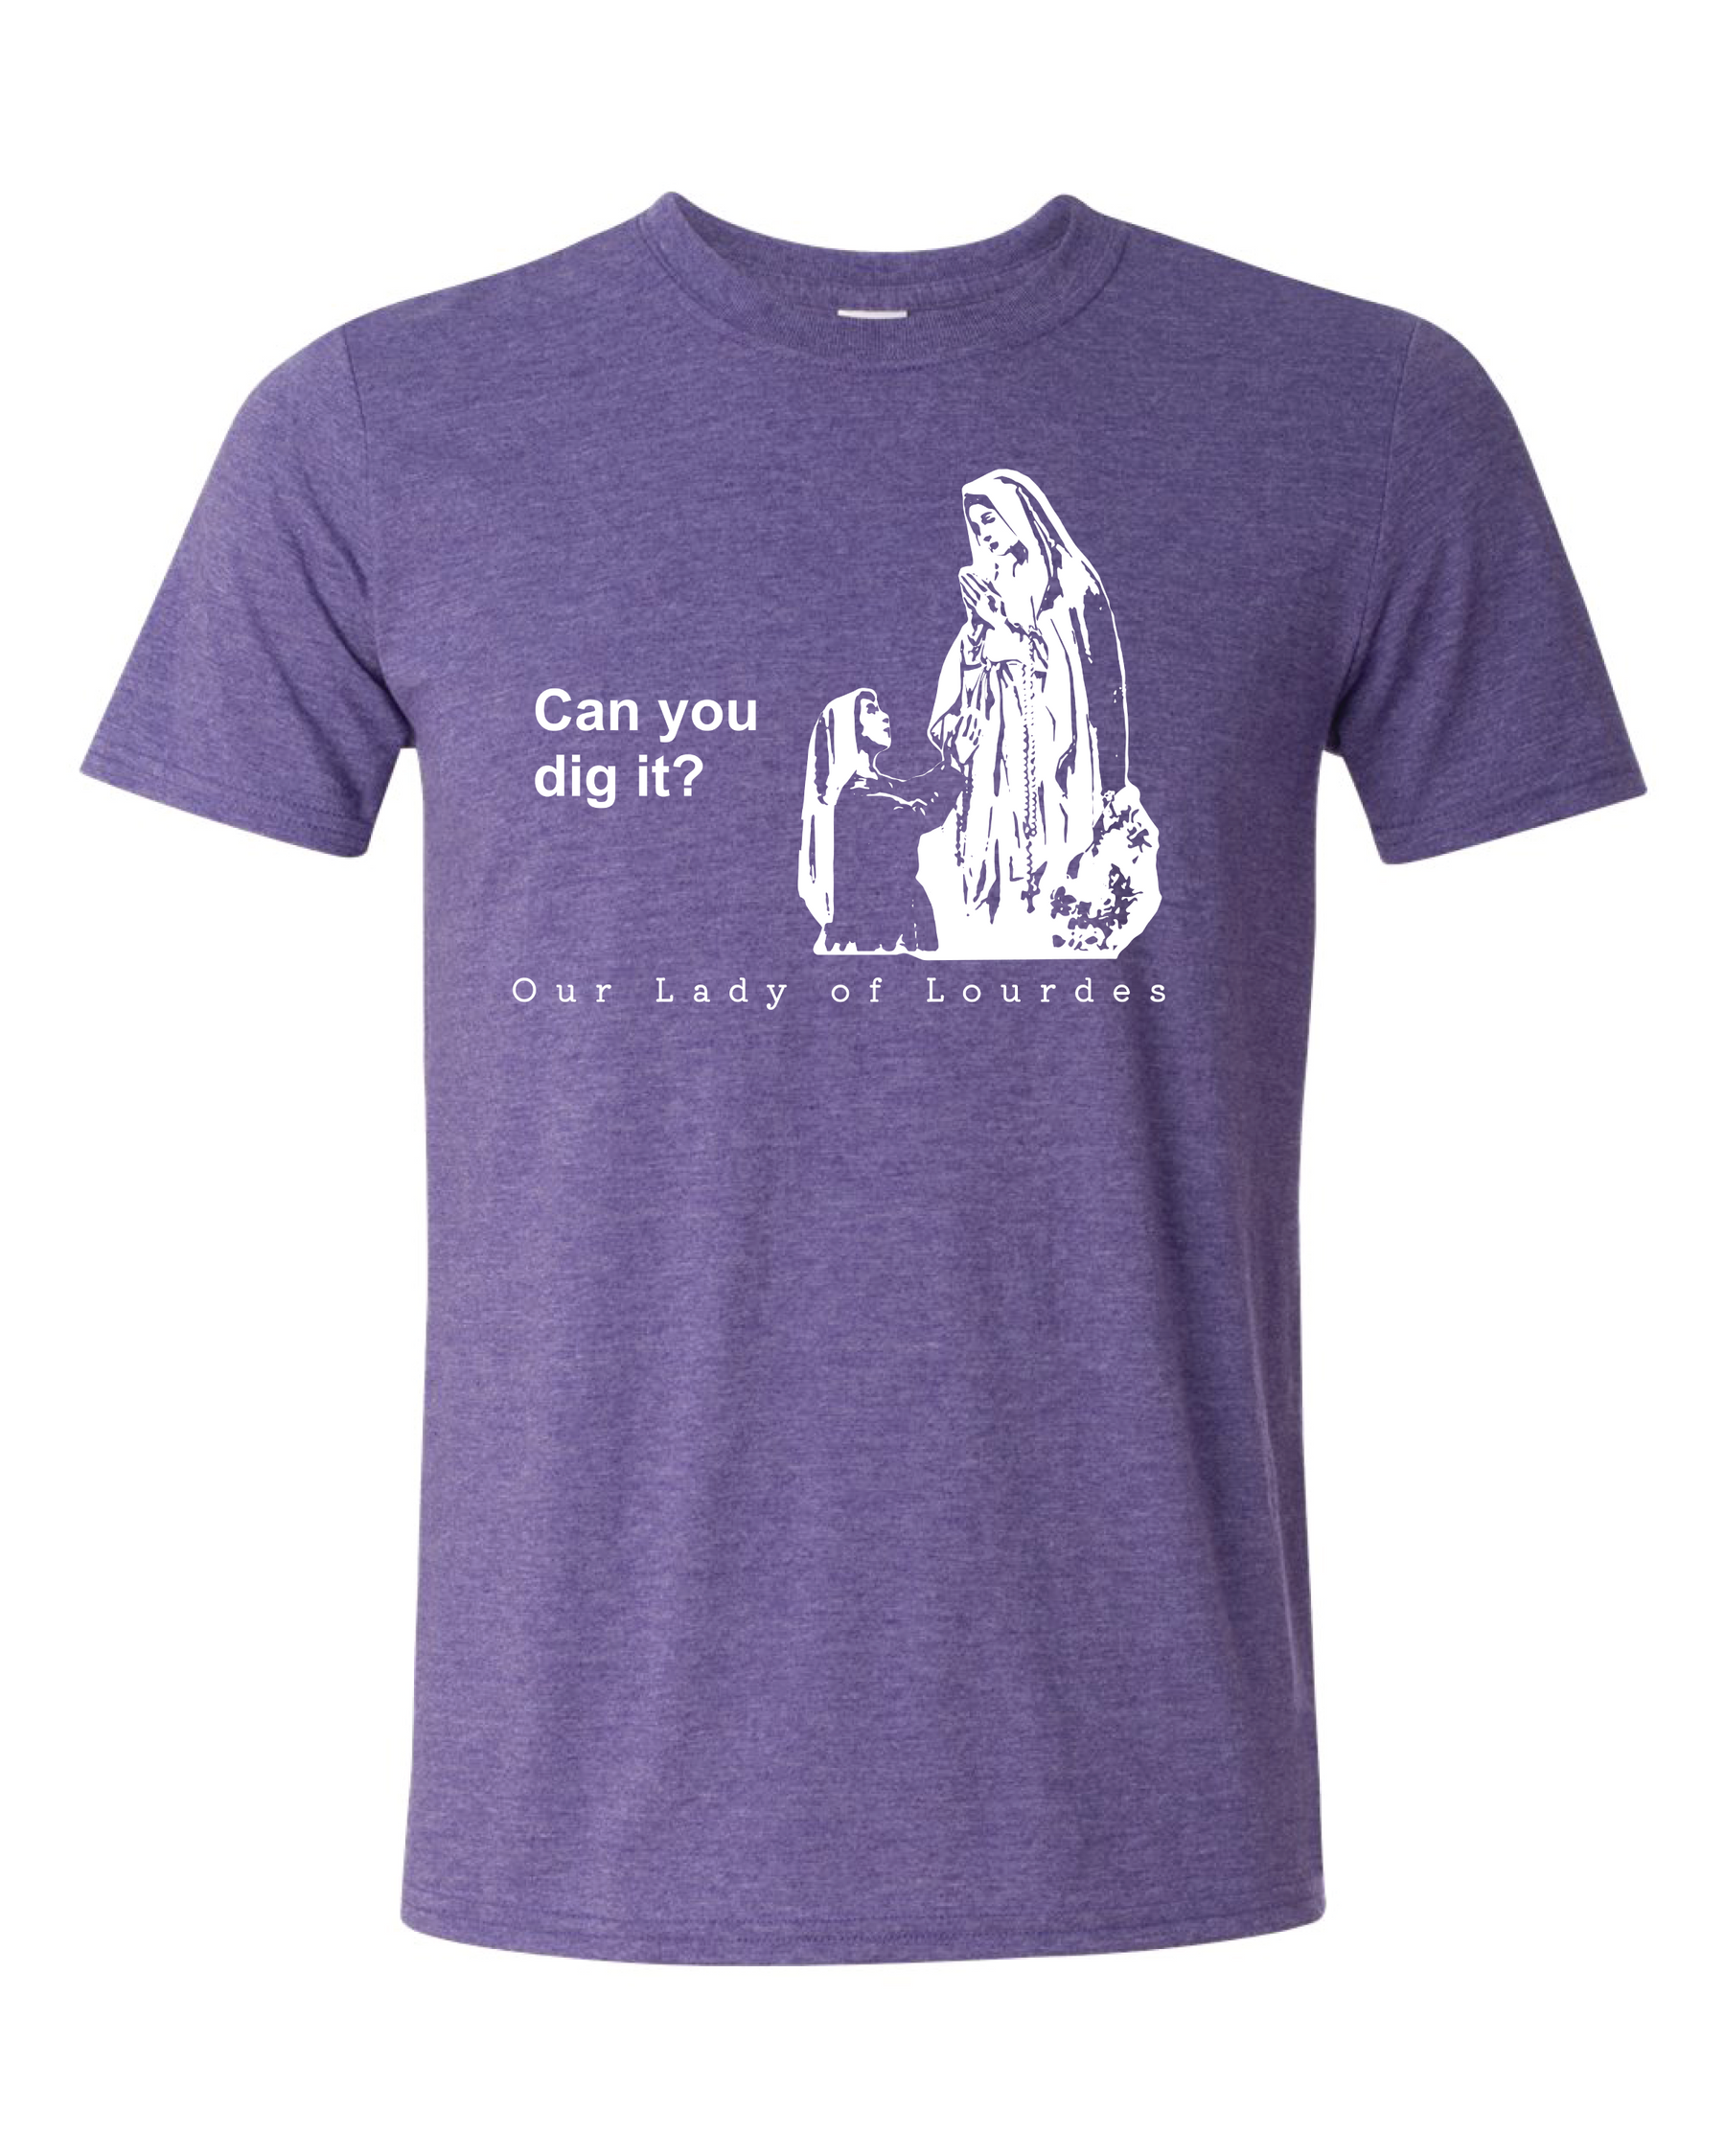 Can you dig it? - Our Lady of Lourdes T Shirt